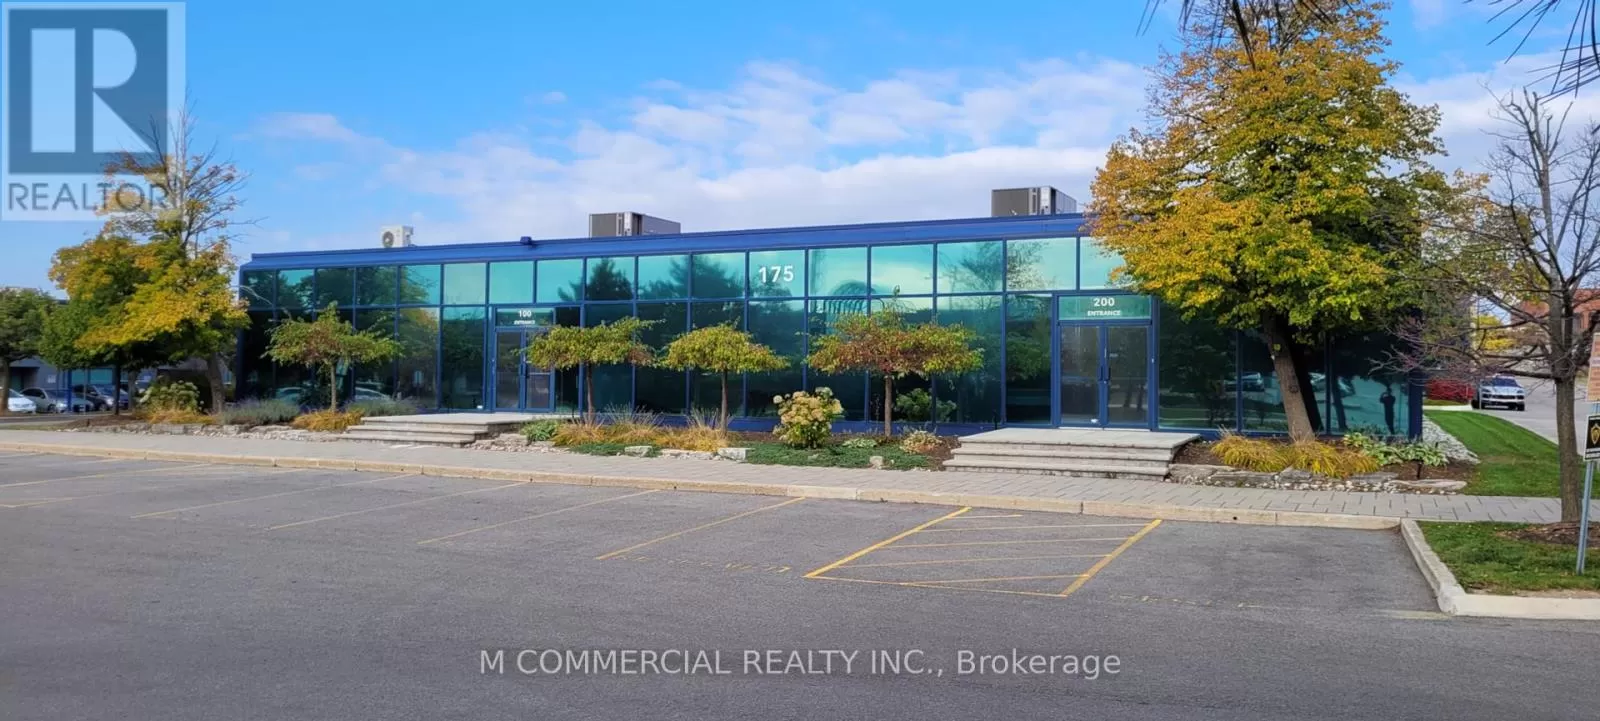 Offices for rent: 175 Traders Blvd E, Mississauga, Ontario L4Z 3S8